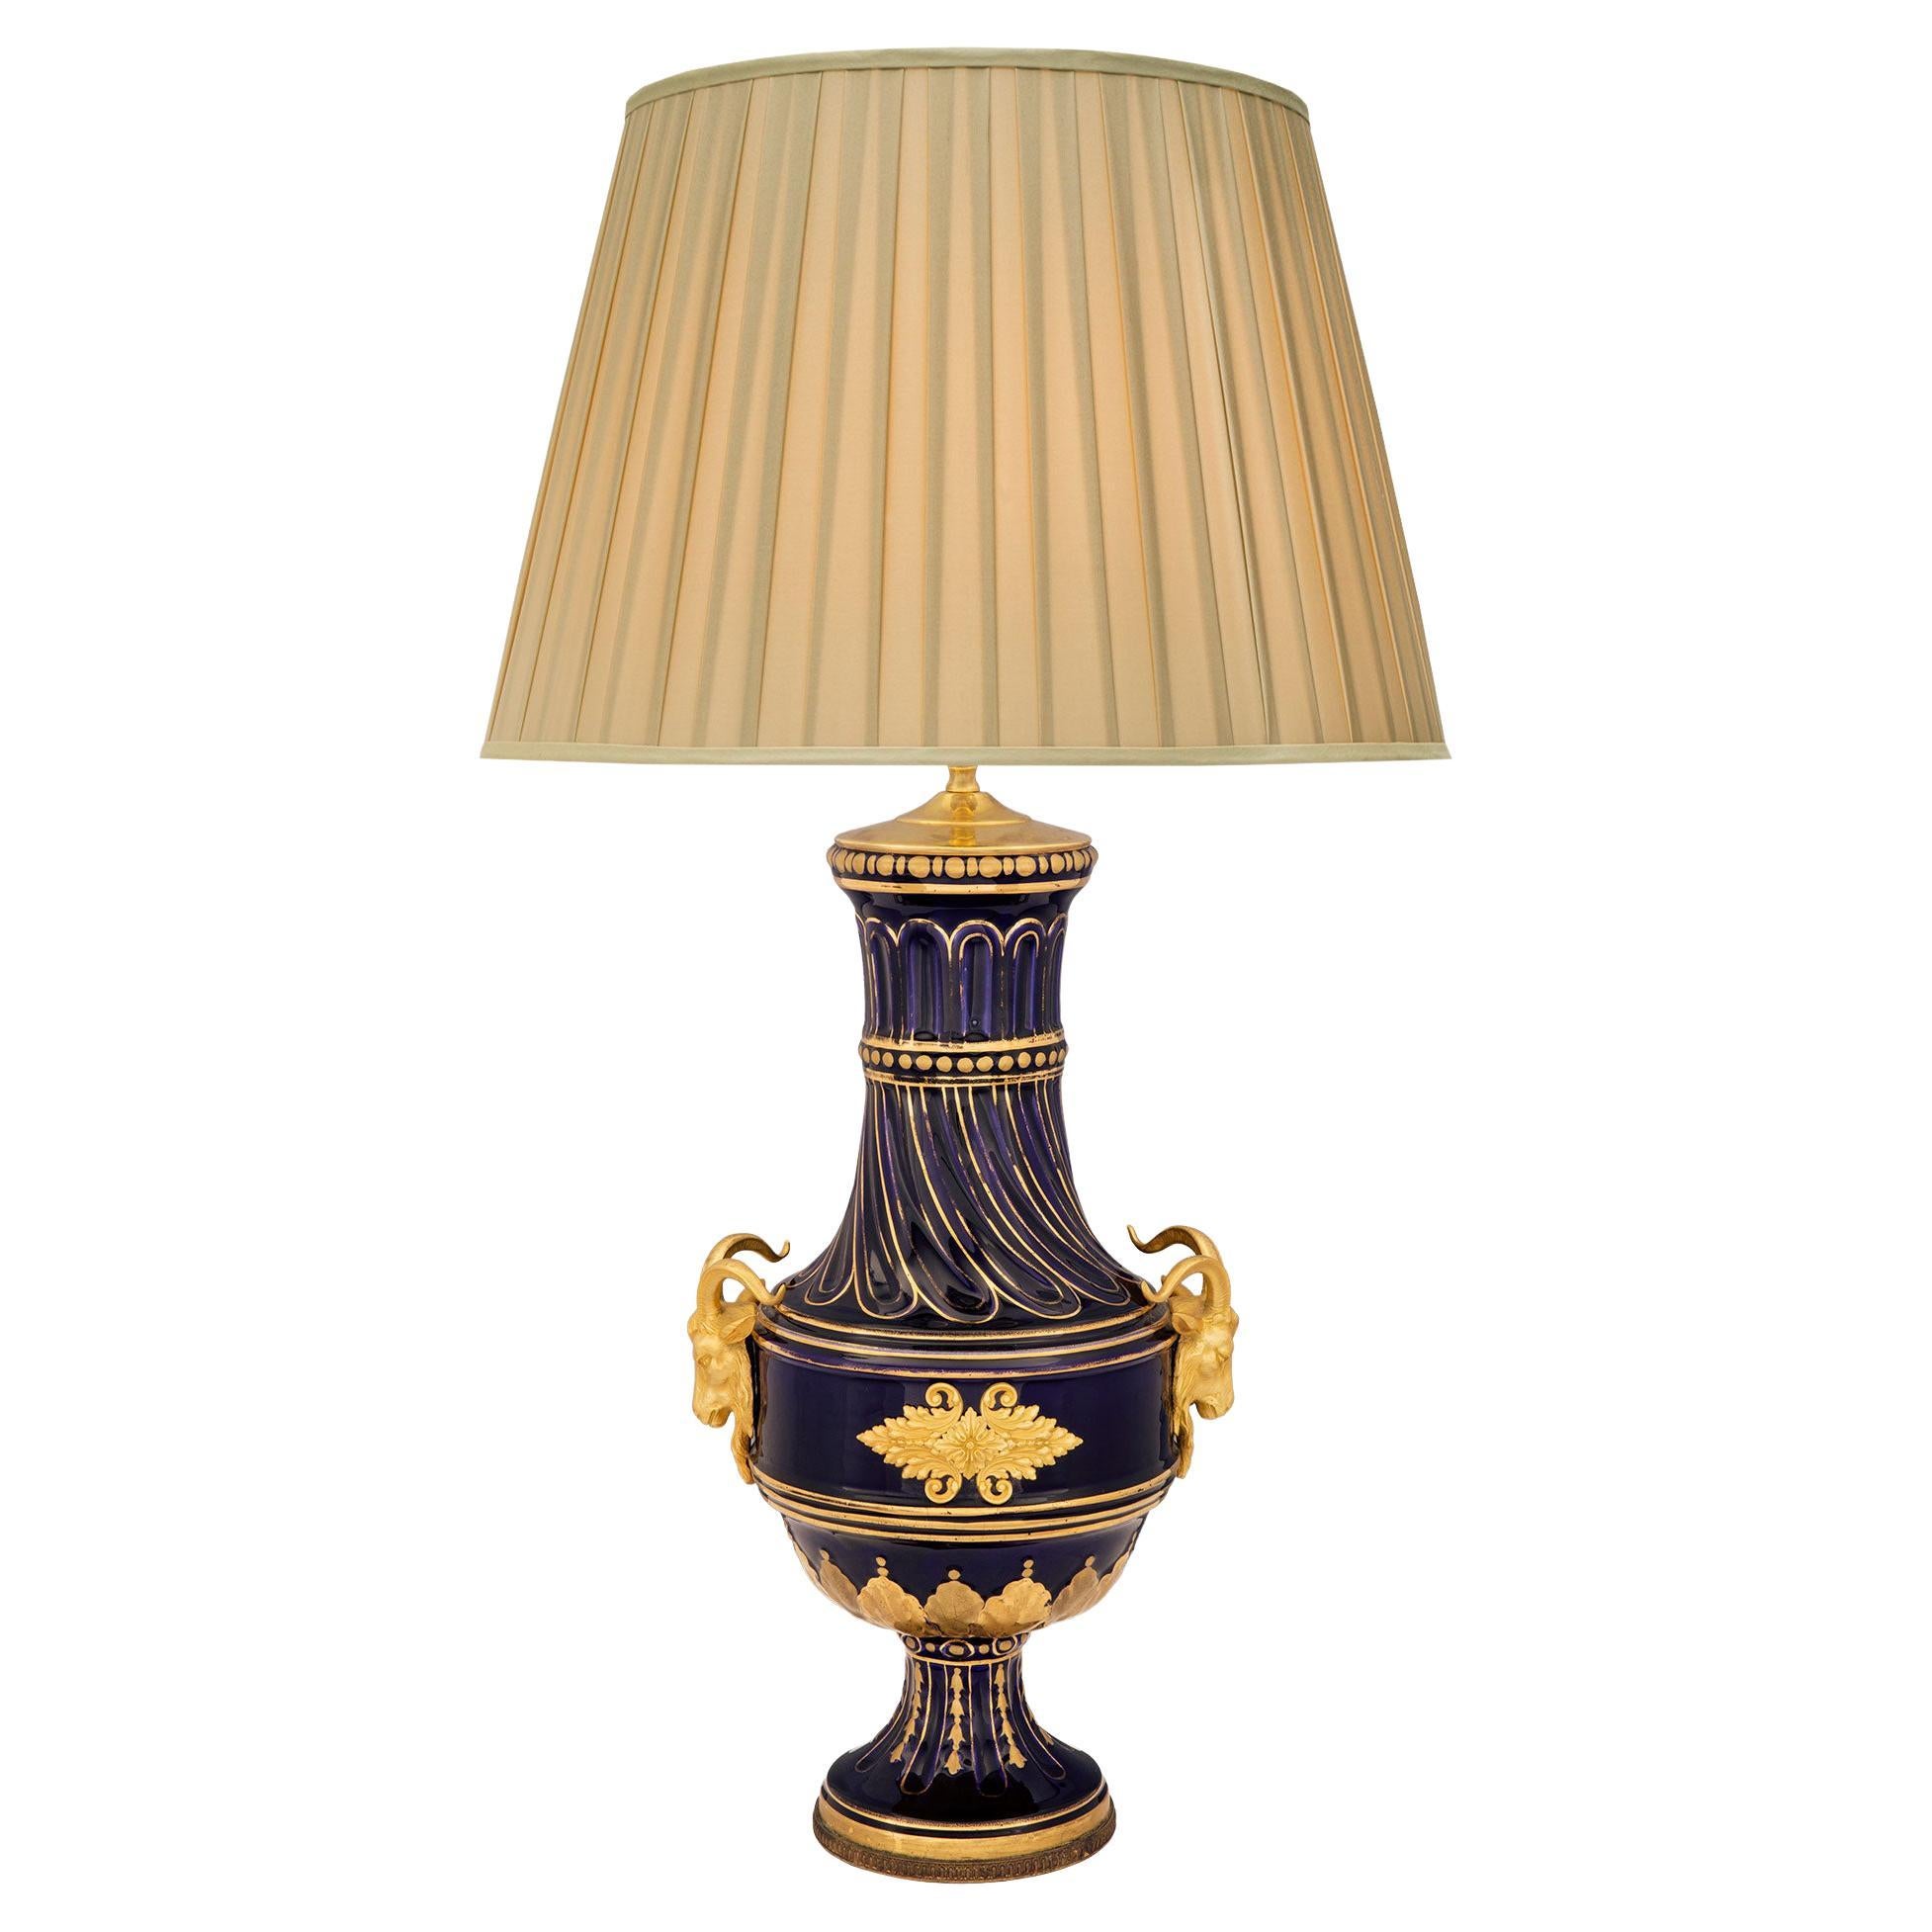 French 19th Century Louis XVI Style Porcelain, Gilt and Ormolu Lamp For Sale